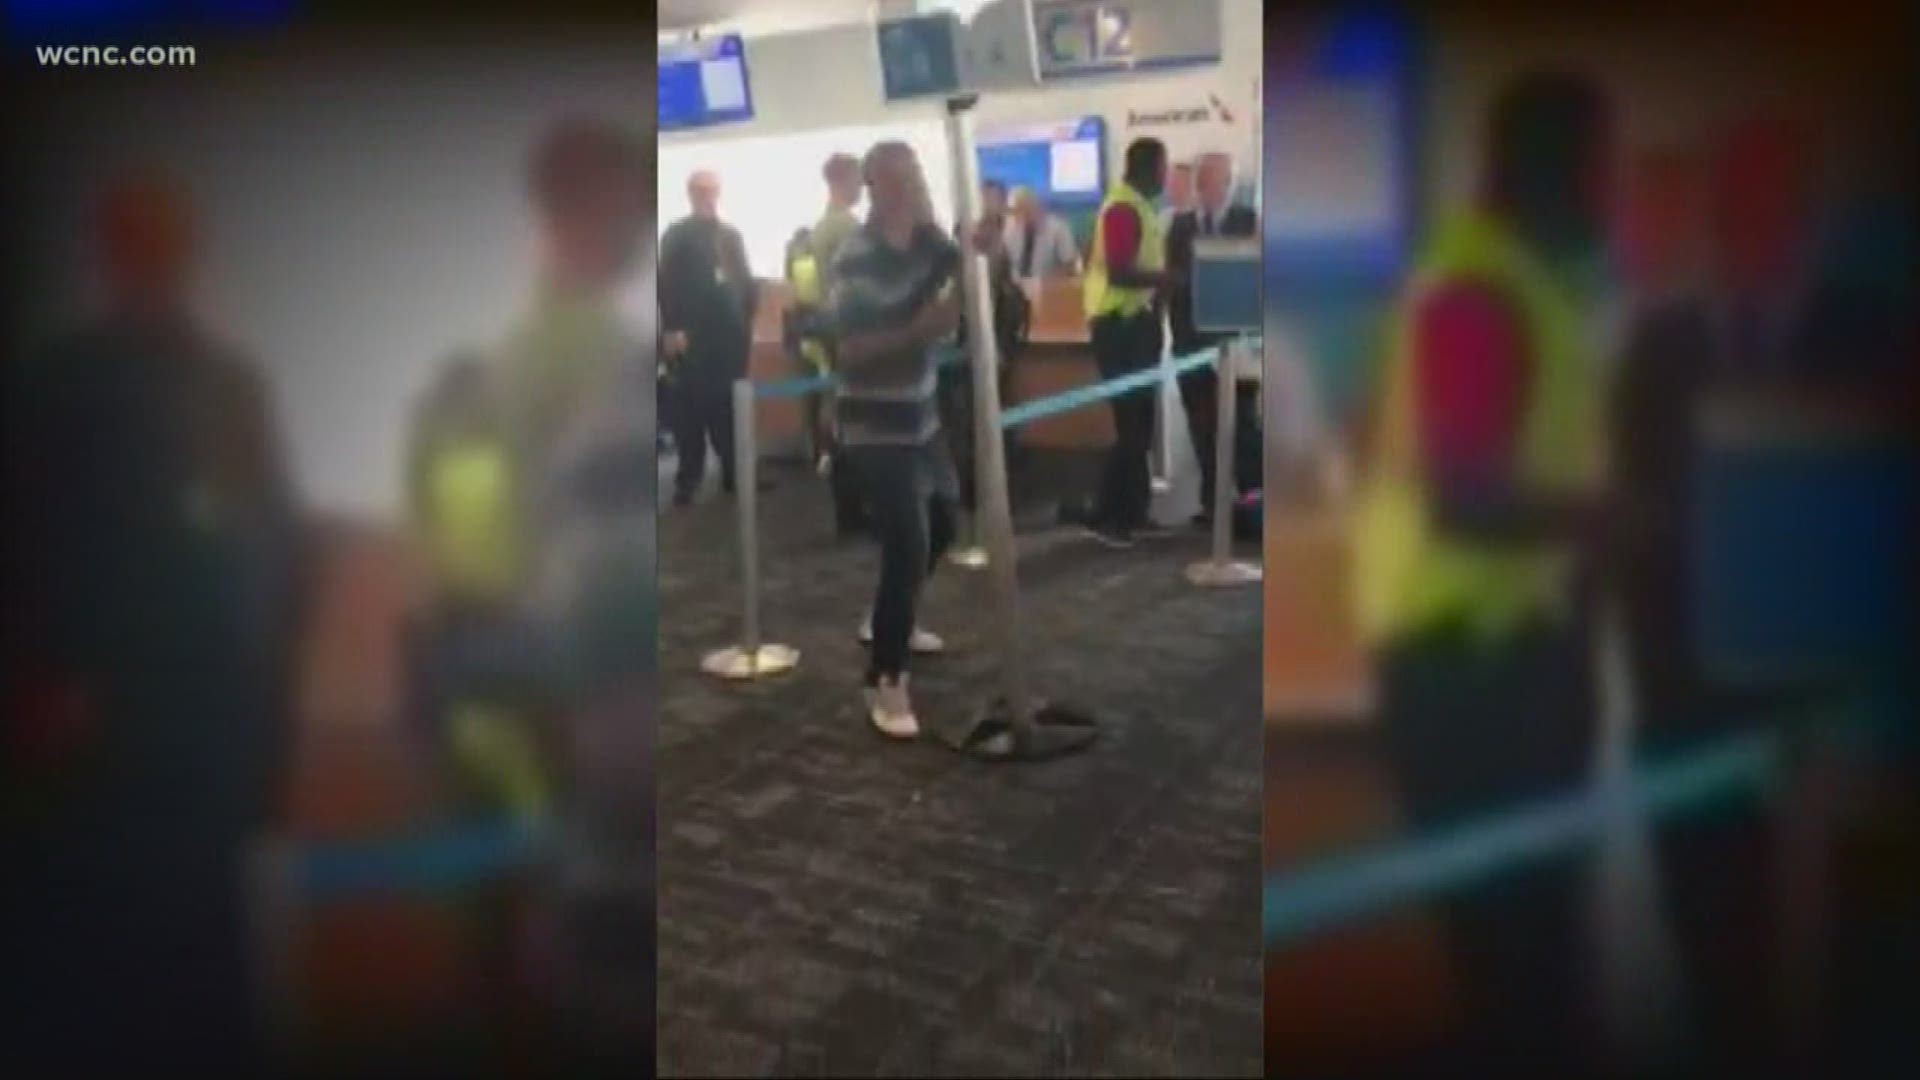 The reasons passengers act out included frustration over waiting in long lines, paying baggage fees, or being intoxicated, according to the report.